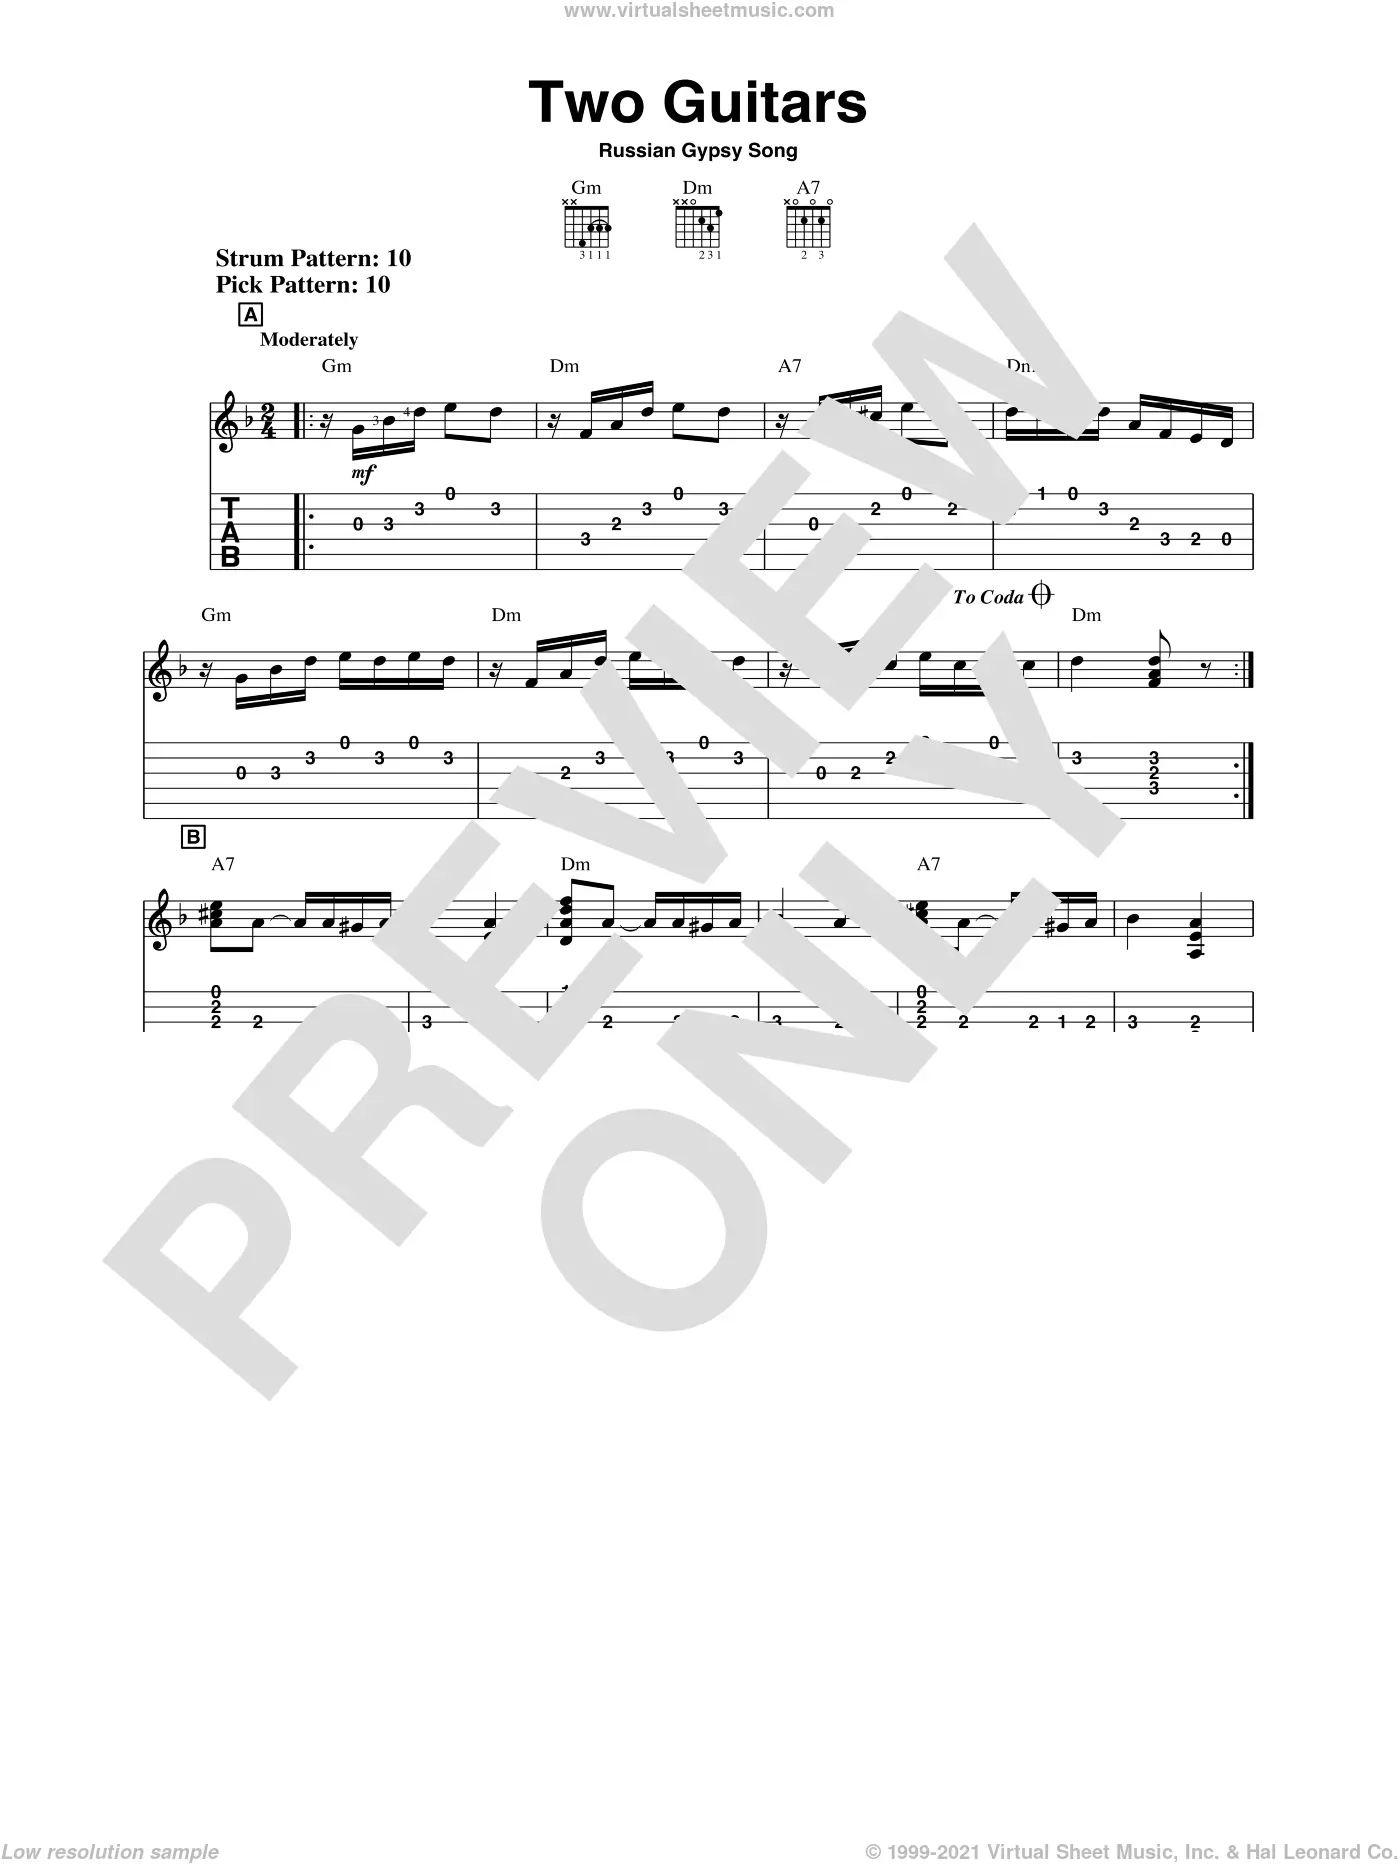 Download Digital Sheet Music of Psy for Guitar notes and tablatures